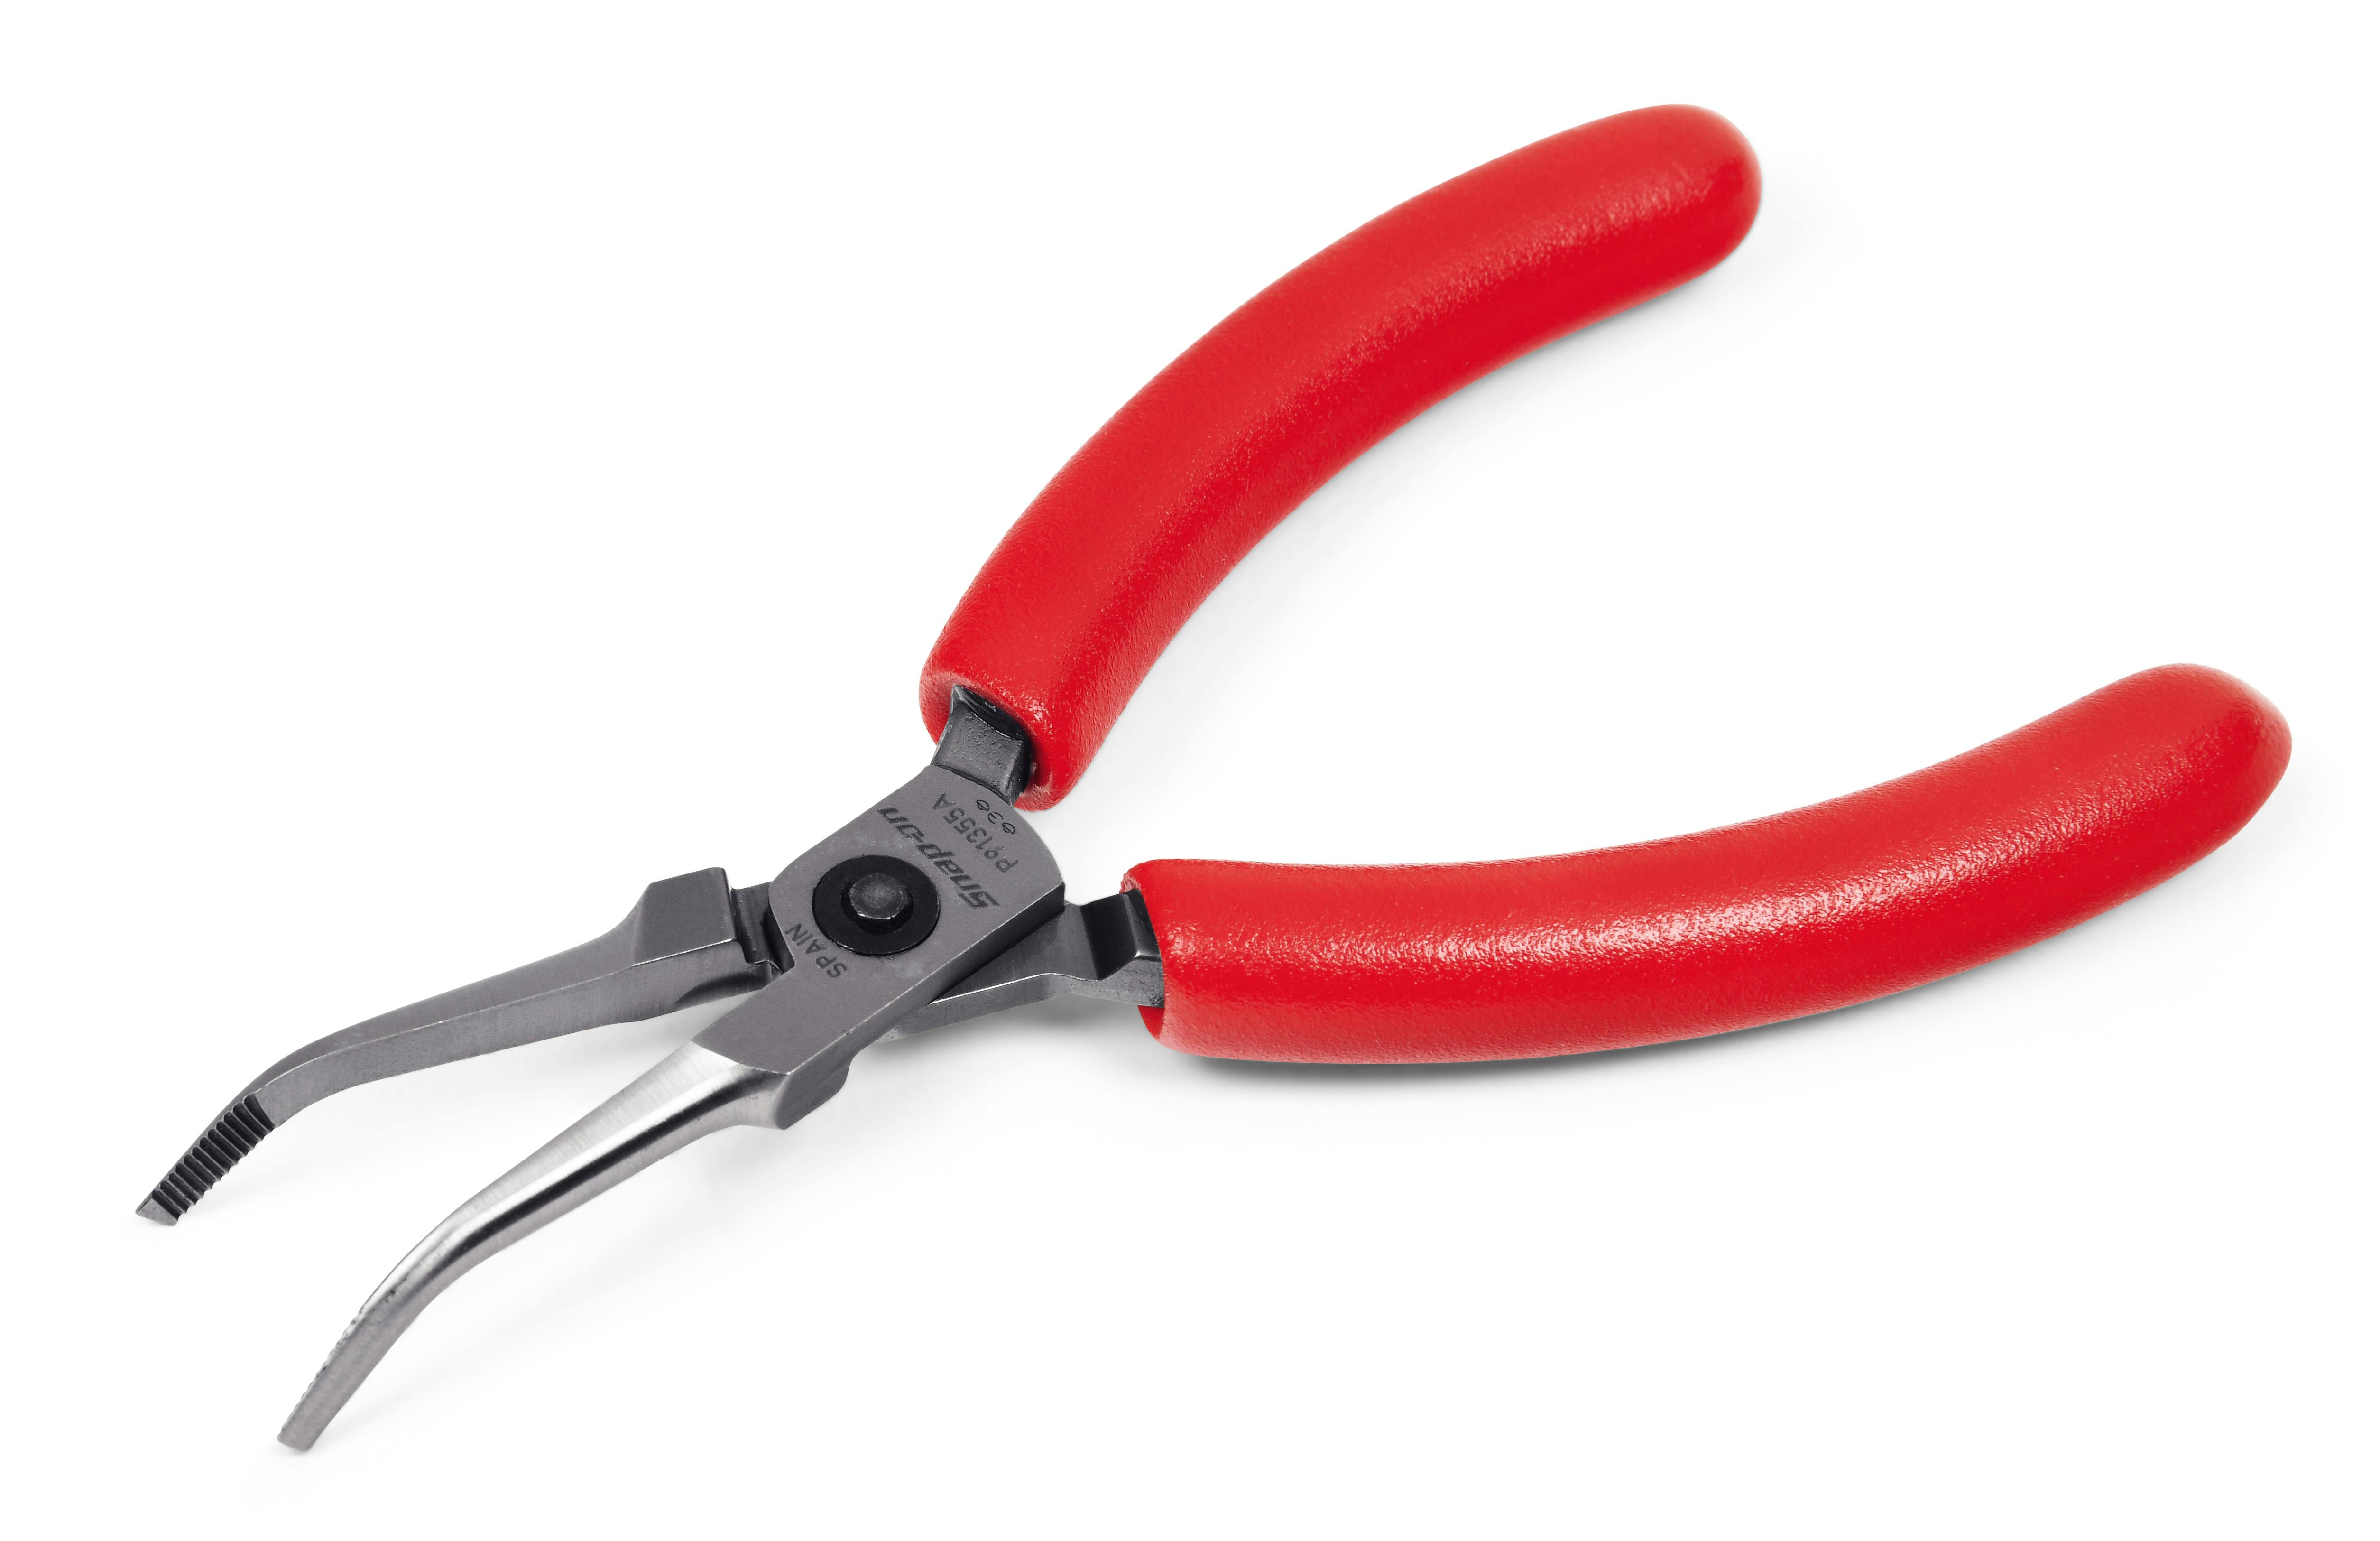 Mini Bent Nose Pliers 4.5 Toothless Curved Precision Plier W Handle - Black Red